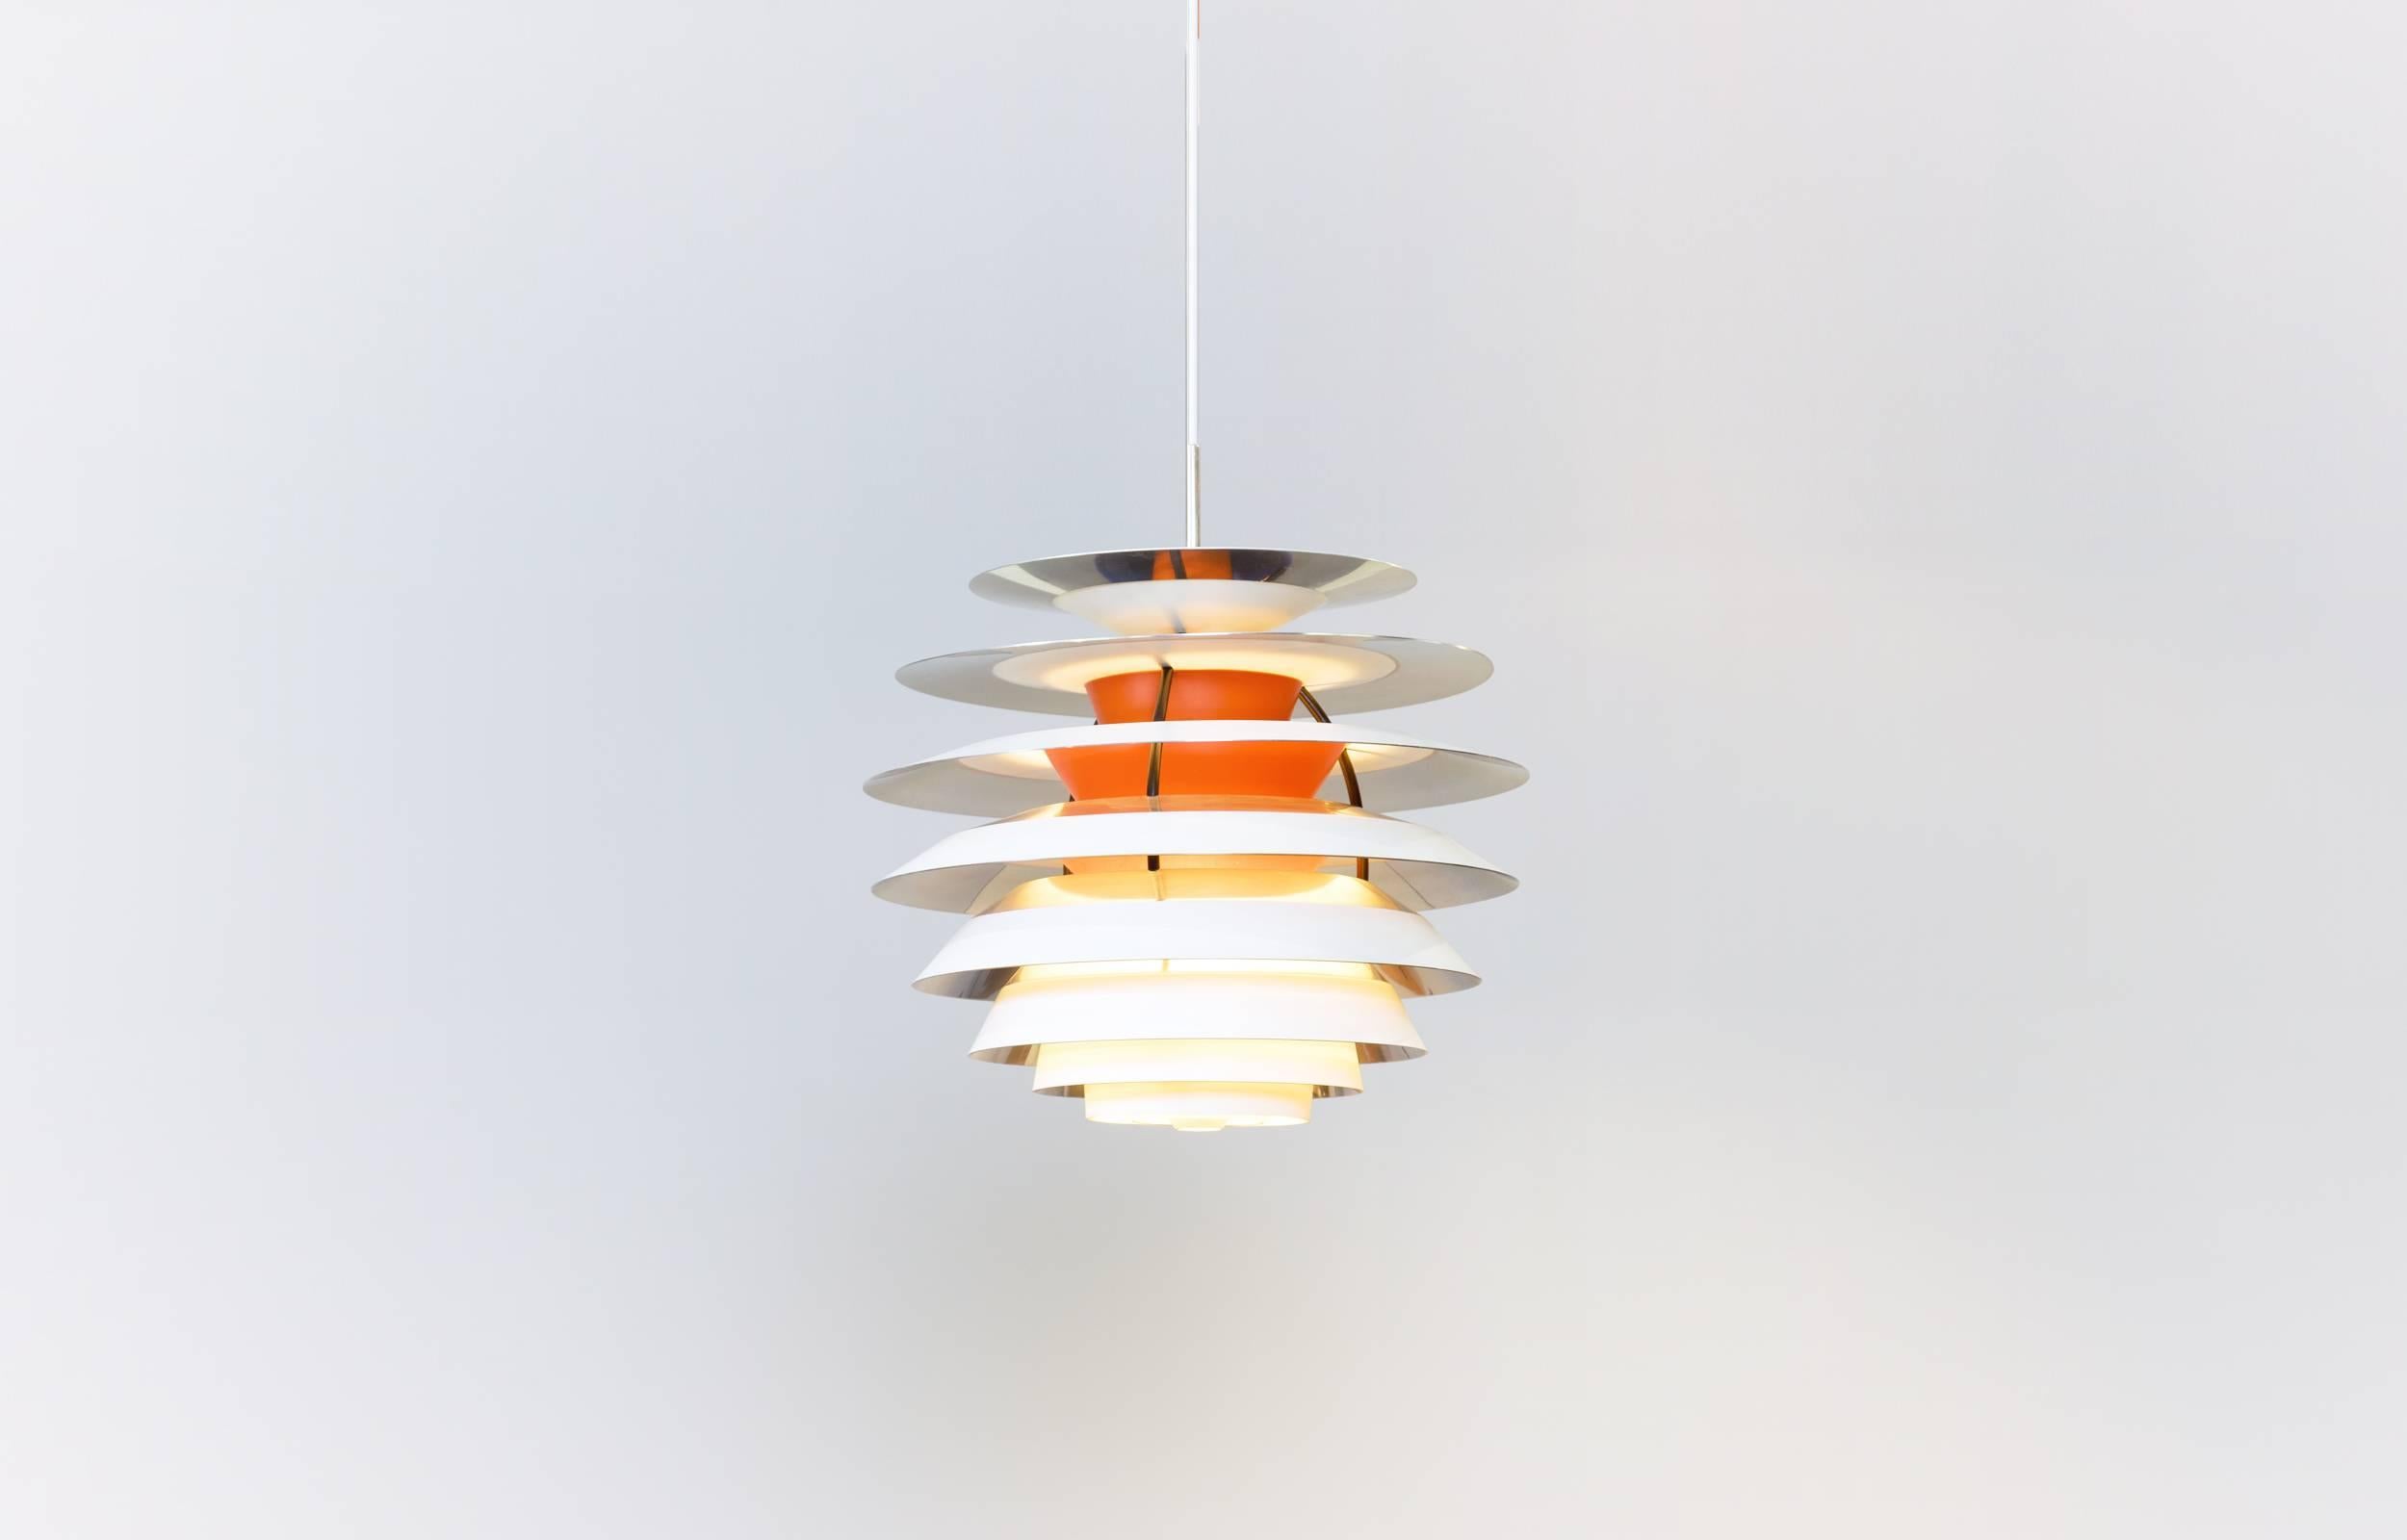 Wonderful pendant lamp. Out of production. White/orange lacquered metal and chromed parts with black lacquered brass fittings. New white 2.5 m fabric cord.

Perfect original condition with minor wear consistent with age and use.